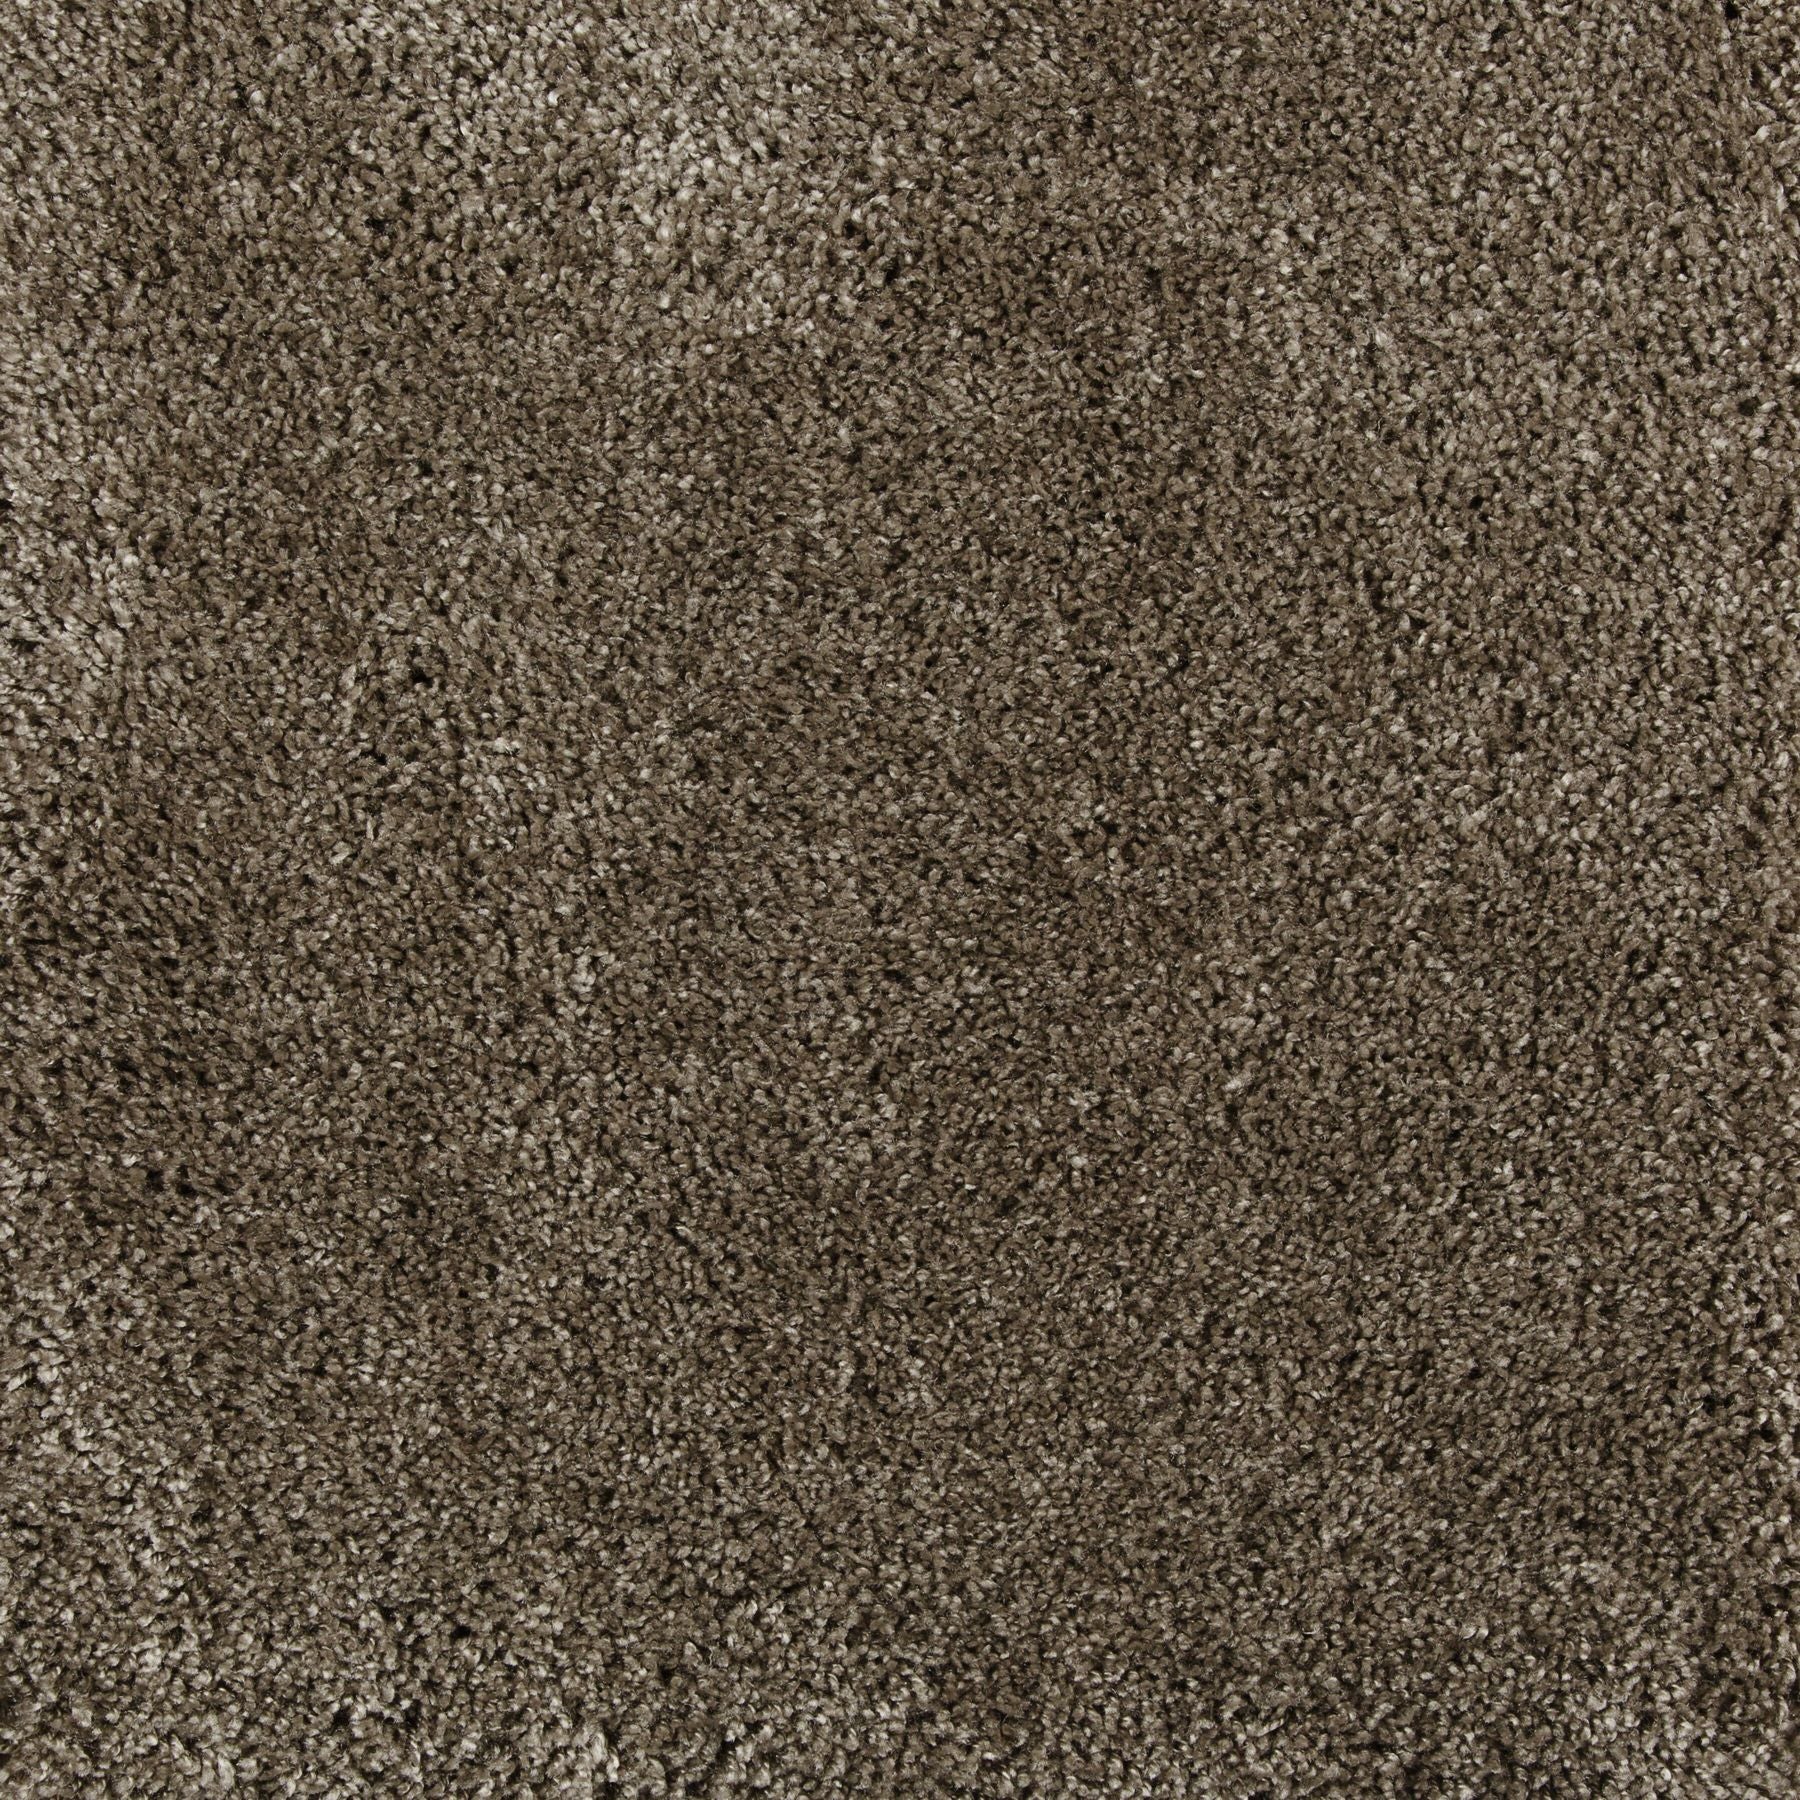 Synthetic broadloom carpet swatch in a cut pile texture in brown.